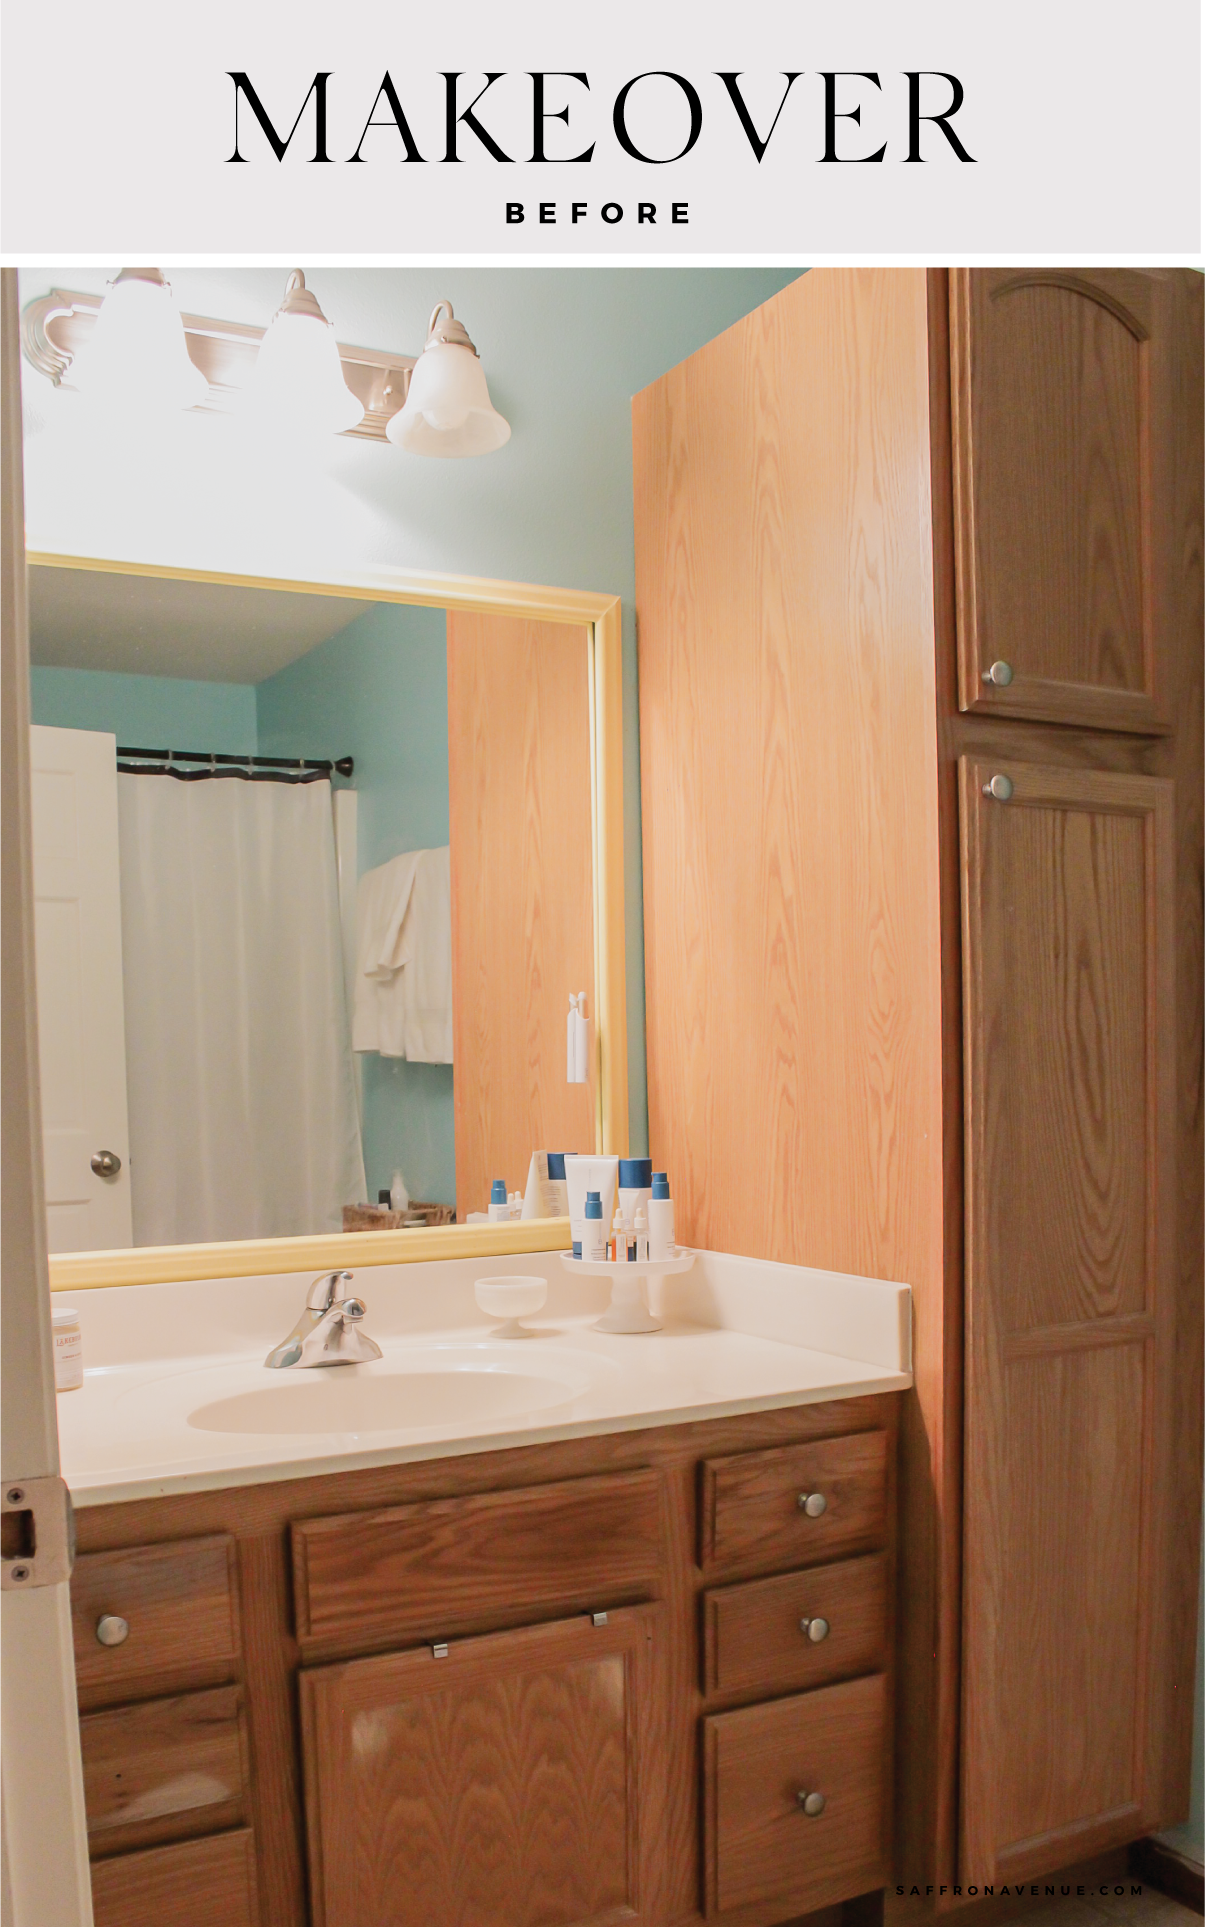 Bathroom Makeover with Benjamin Moore Classic Gray and White Dove Trim - Before and After Bathroom Makeover